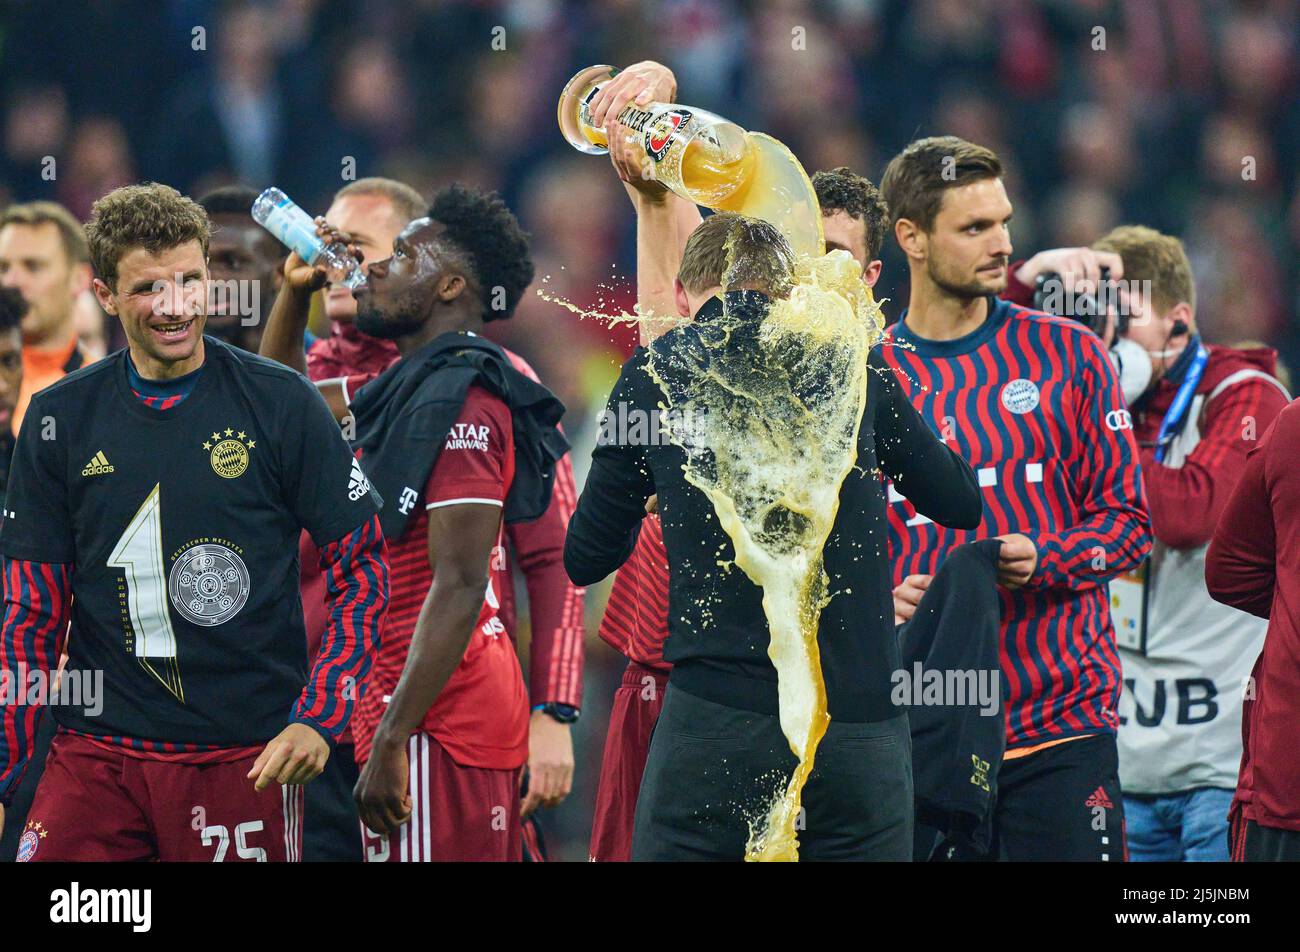 Benjamin PAVARD, FCB 5  beer shower for  Trainer Julian Nagelsmann (FCB), team manager, headcoach, coach,  Thomas MUELLER, MÜLLER, FCB 25  Alphonso DAVIES, FCB 19 Sven ULREICH, FCB 26 goalkeeper,   celebration after the match FC BAYERN MÜNCHEN - BORUSSIA DORTMUND 3-1 1.German Football League on April 23, 2022 in Munich, Germany. Season 2021/2022, match day 31, 1.Bundesliga, München, 31.Spieltag. FCB, BVB © Peter Schatz / Alamy Live News    - DFL REGULATIONS PROHIBIT ANY USE OF PHOTOGRAPHS as IMAGE SEQUENCES and/or QUASI-VIDEO - Stock Photo